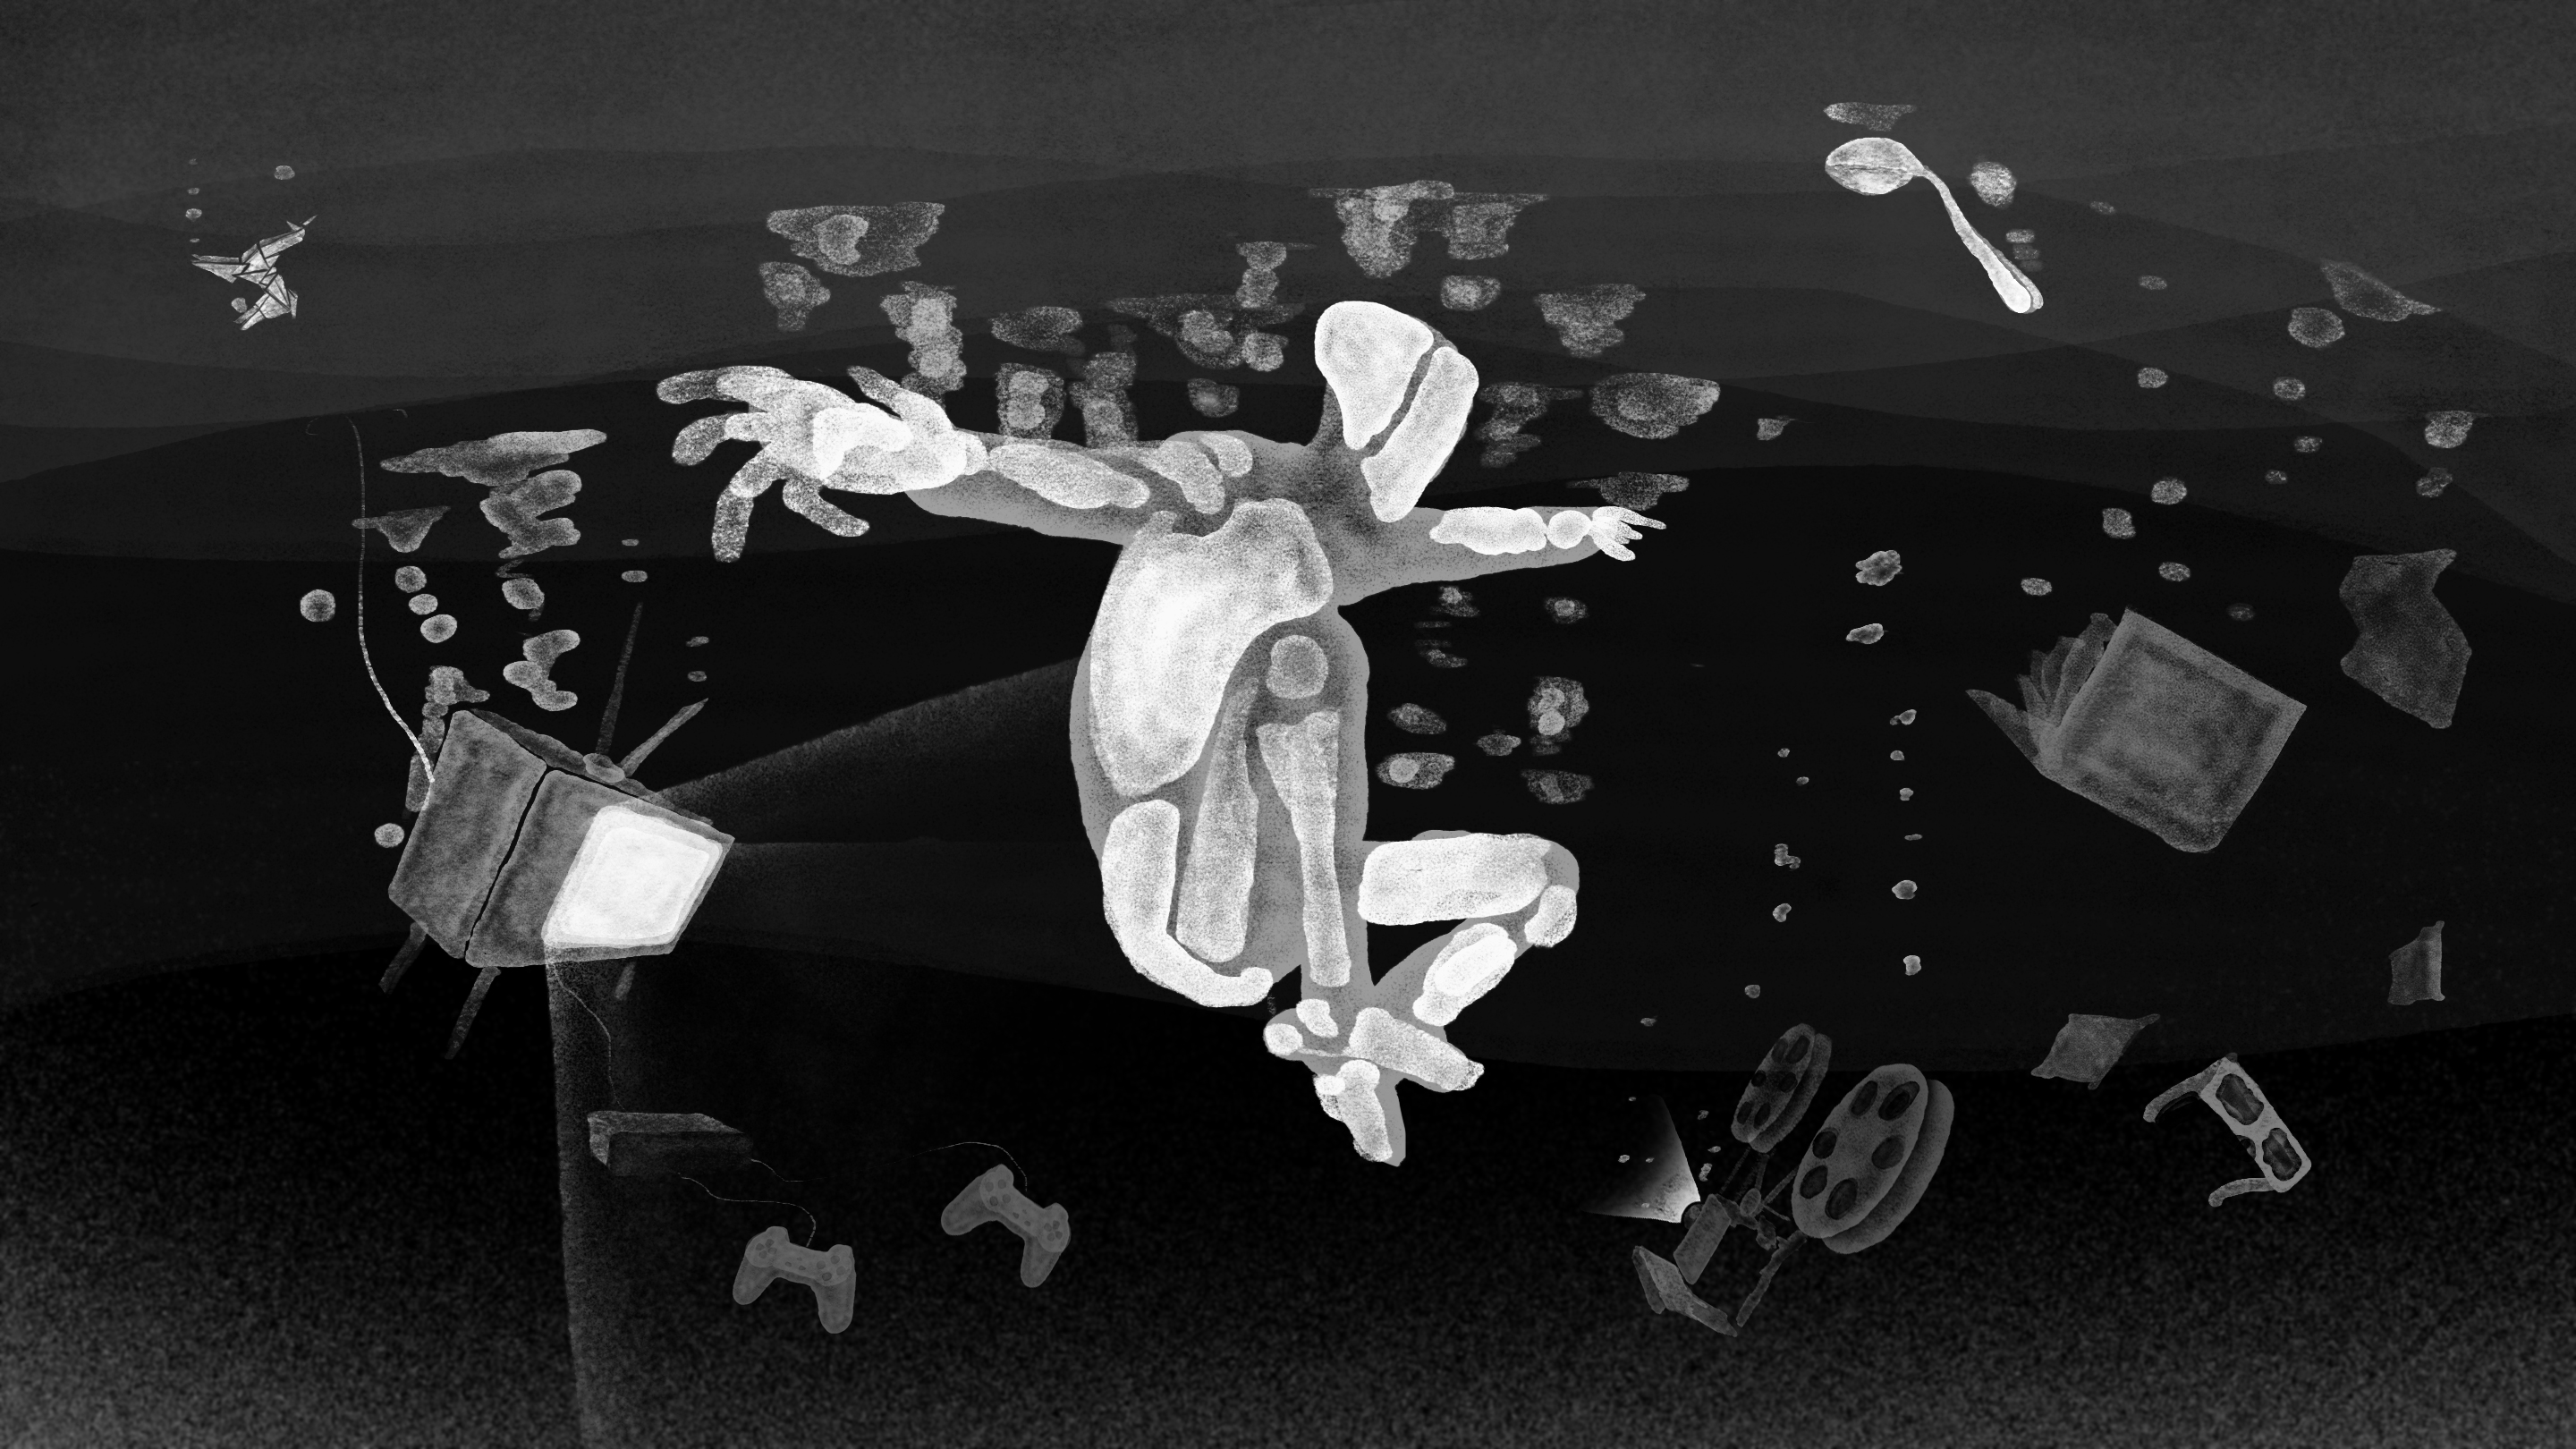 Illustration of a space-like dark expanse, with a ghostly humanoid figure with outstretched limbs floats. books, a bent spoon, origami of a unicorn, game controllers, TV and film reels are scattered around. The monochromatic scene evokes mystery and surrealism.